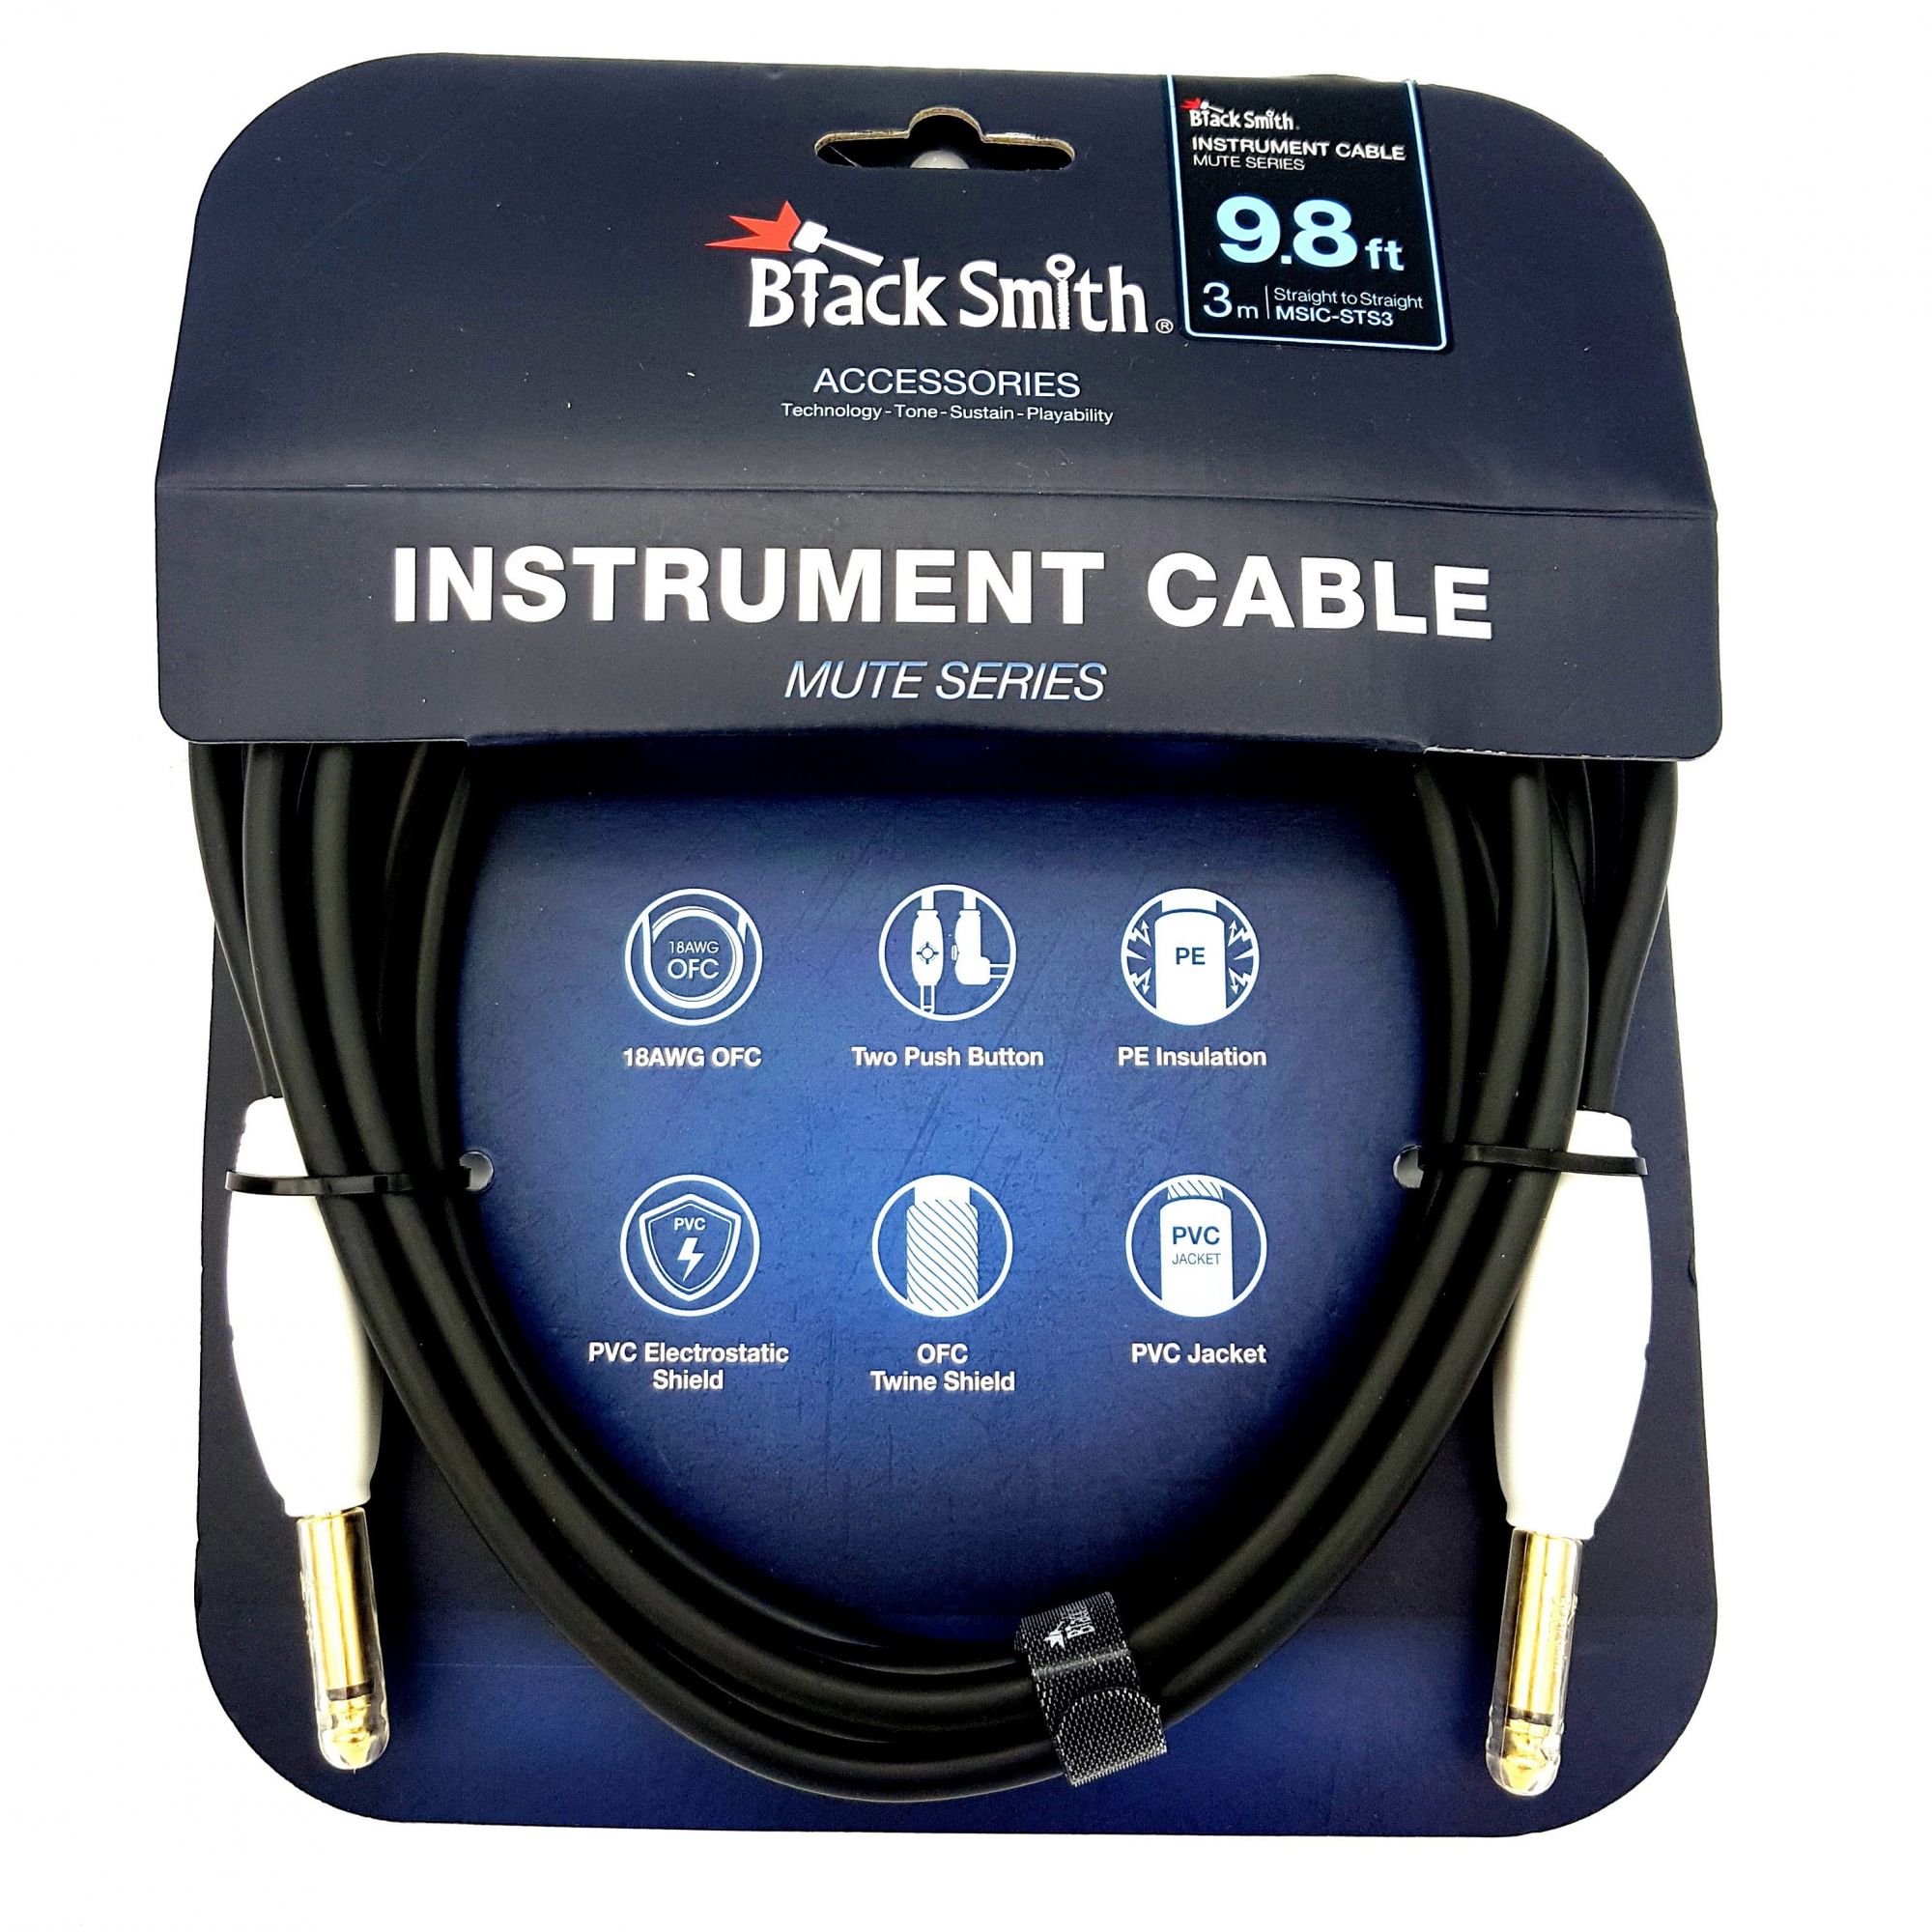 Blacksmith Mute Series Instrument Cable 3m Online price in India